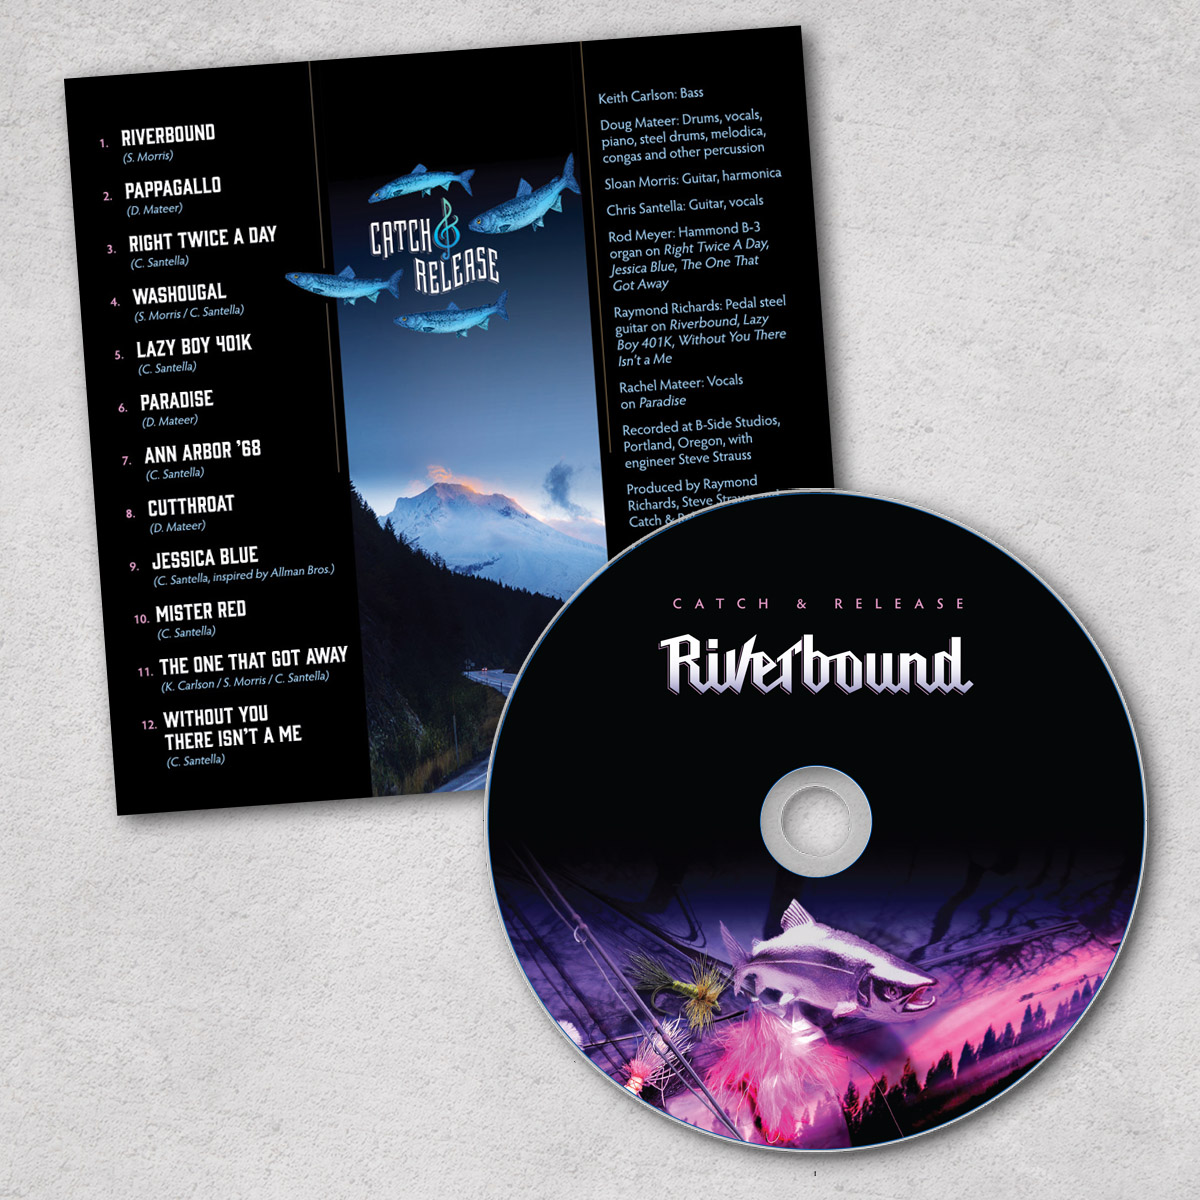 Disc art of Riverbound CD